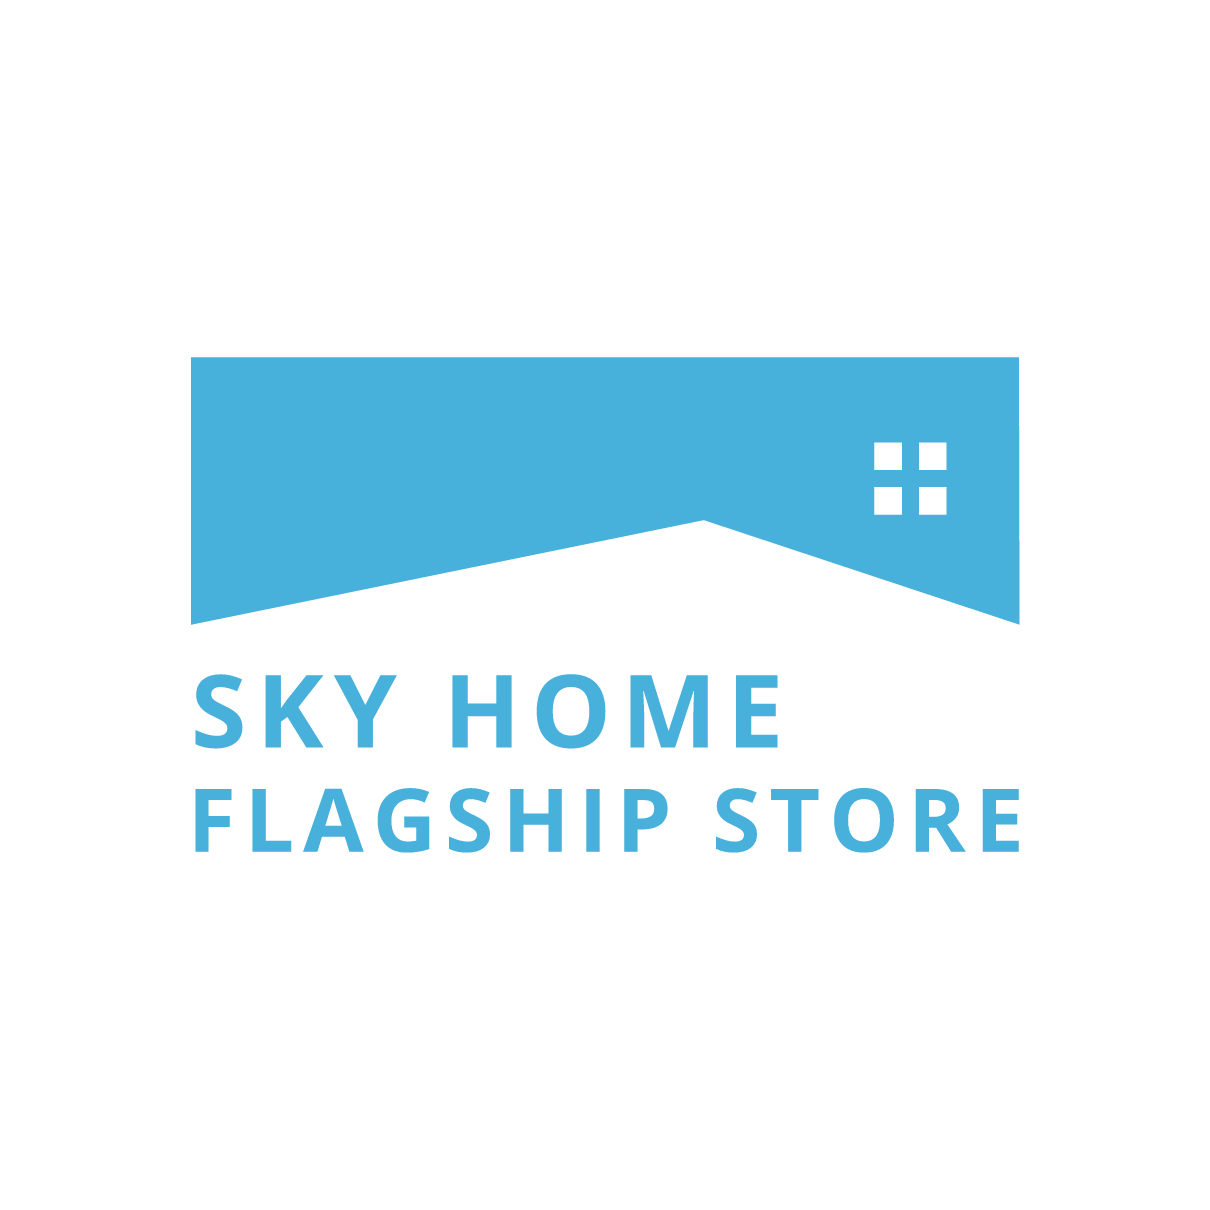 SKYHOME FLAGSHIP STORE